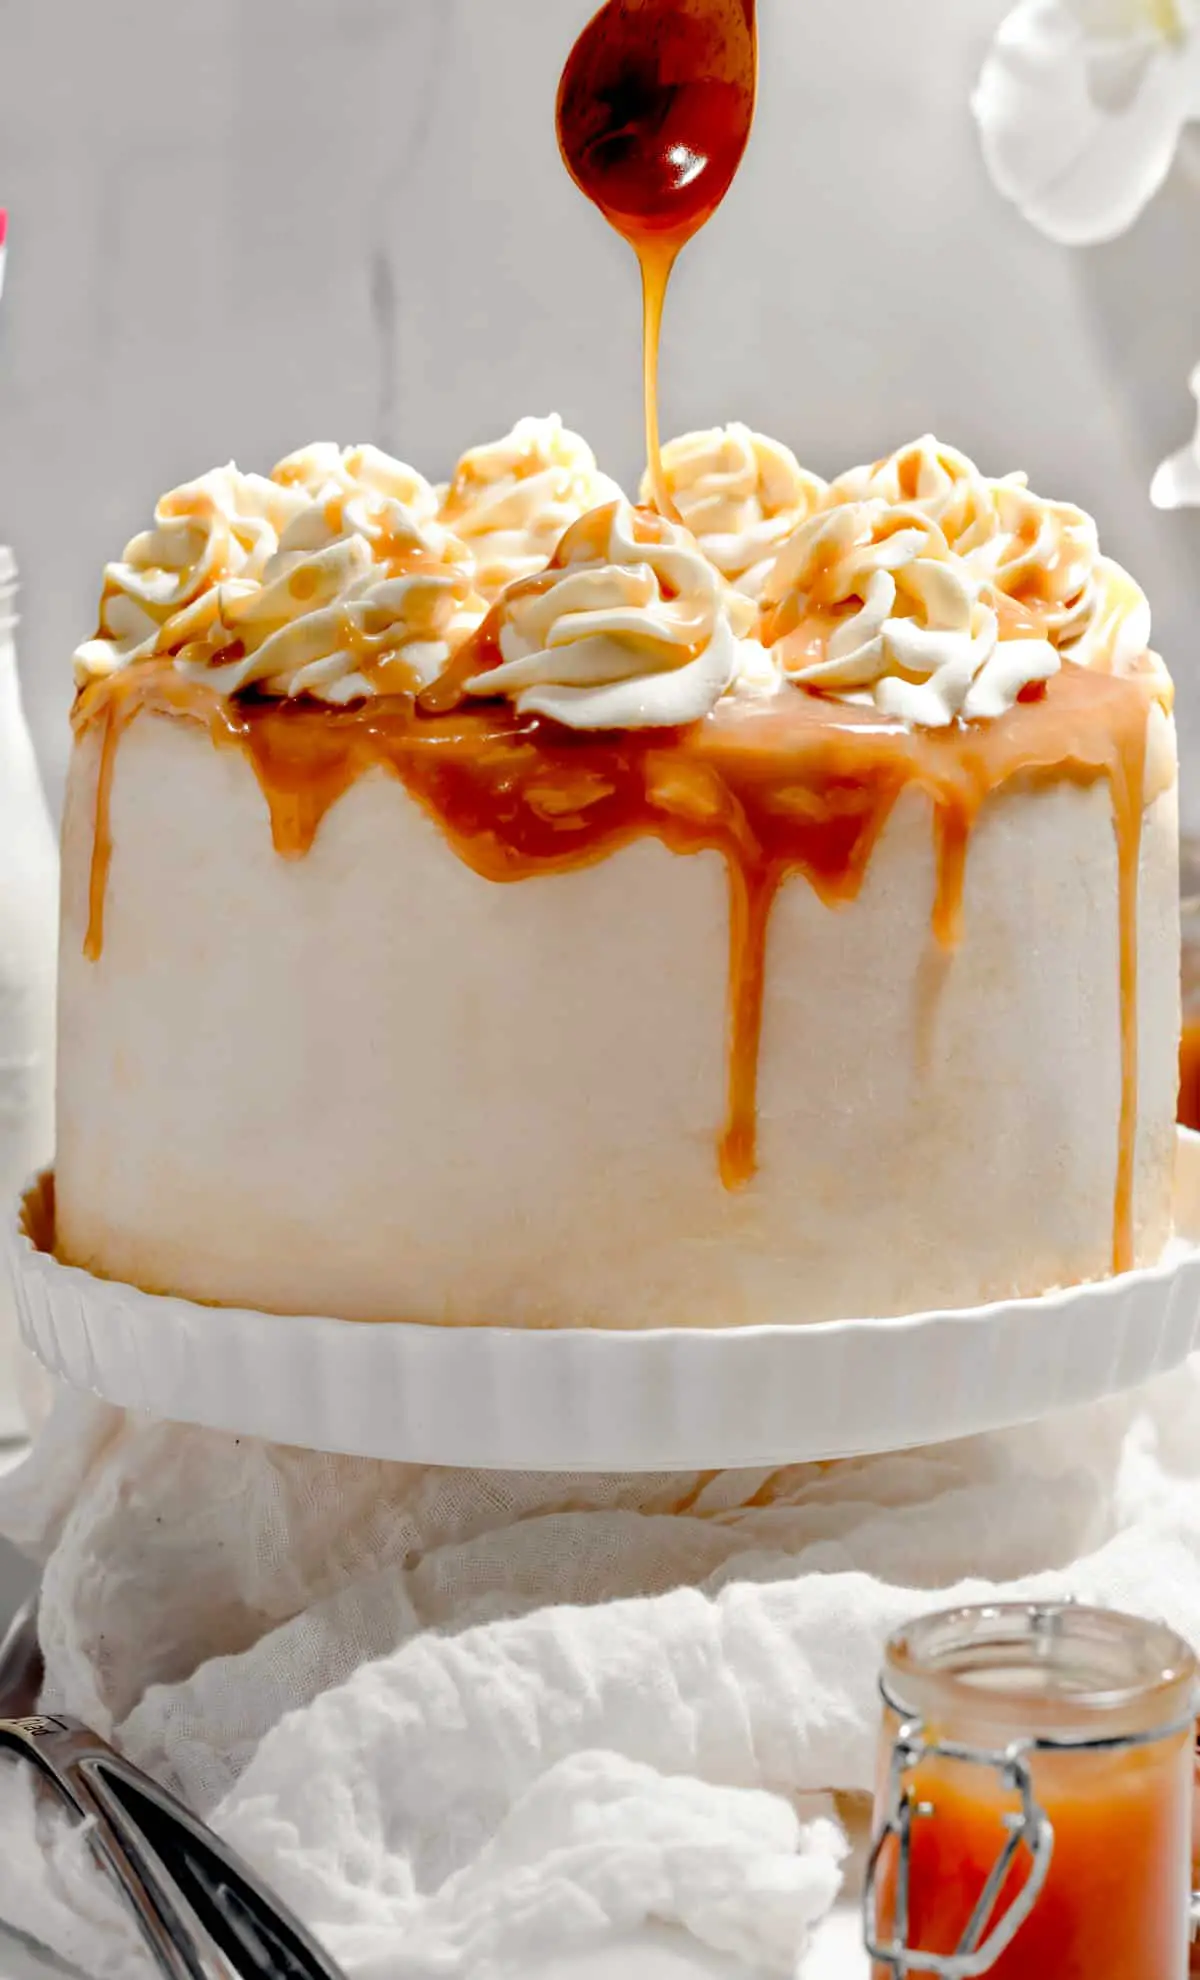 butterscotch sauce drizzled on cake